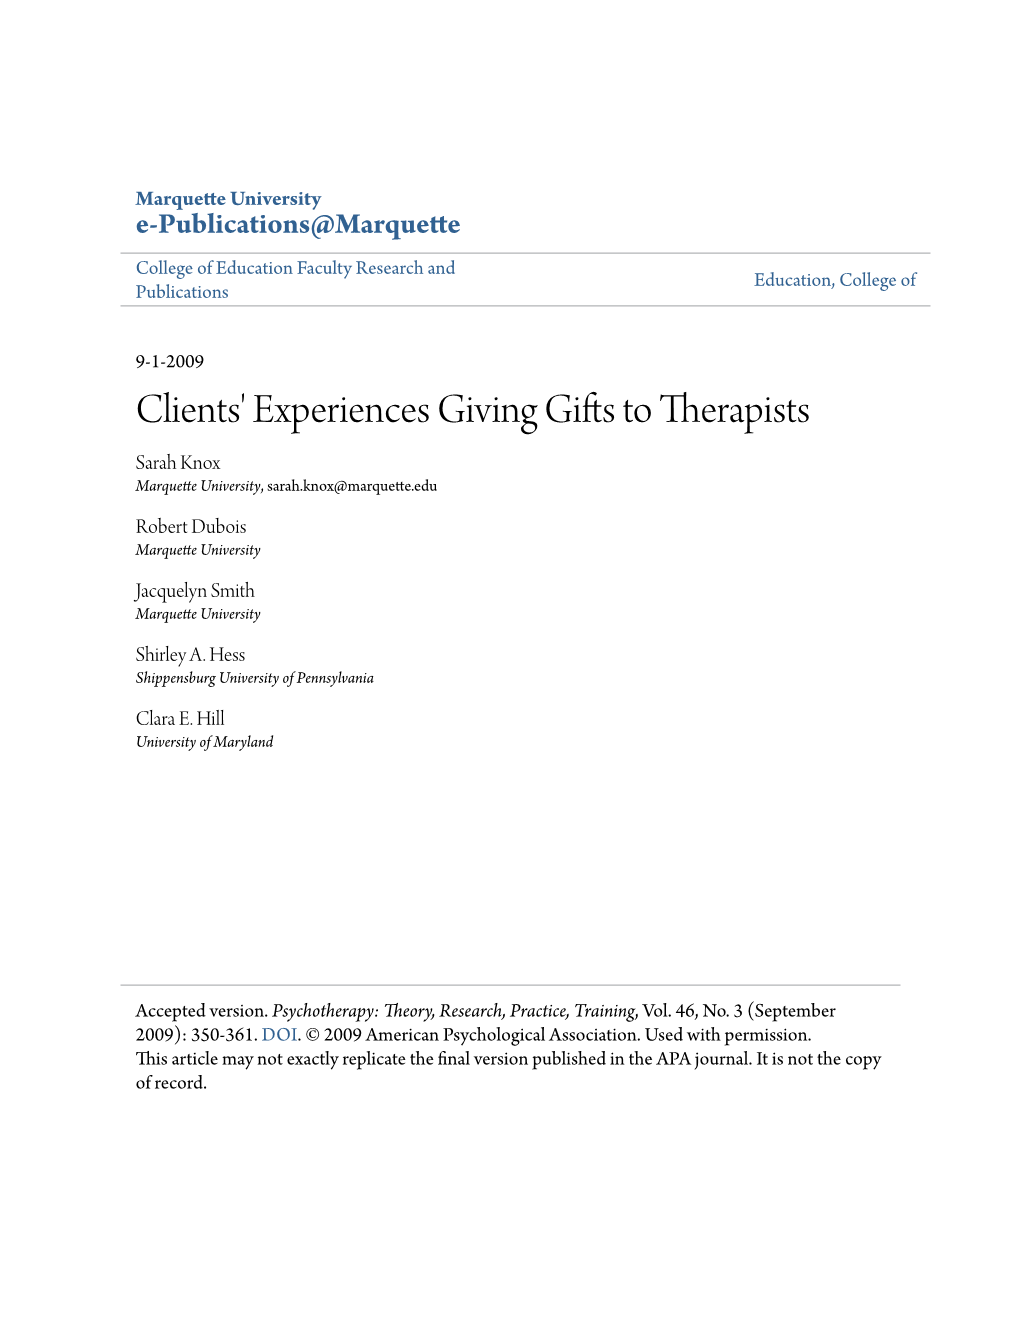 Clients' Experiences Giving Gifts to Therapists Sarah Knox Marquette University, Sarah.Knox@Marquette.Edu